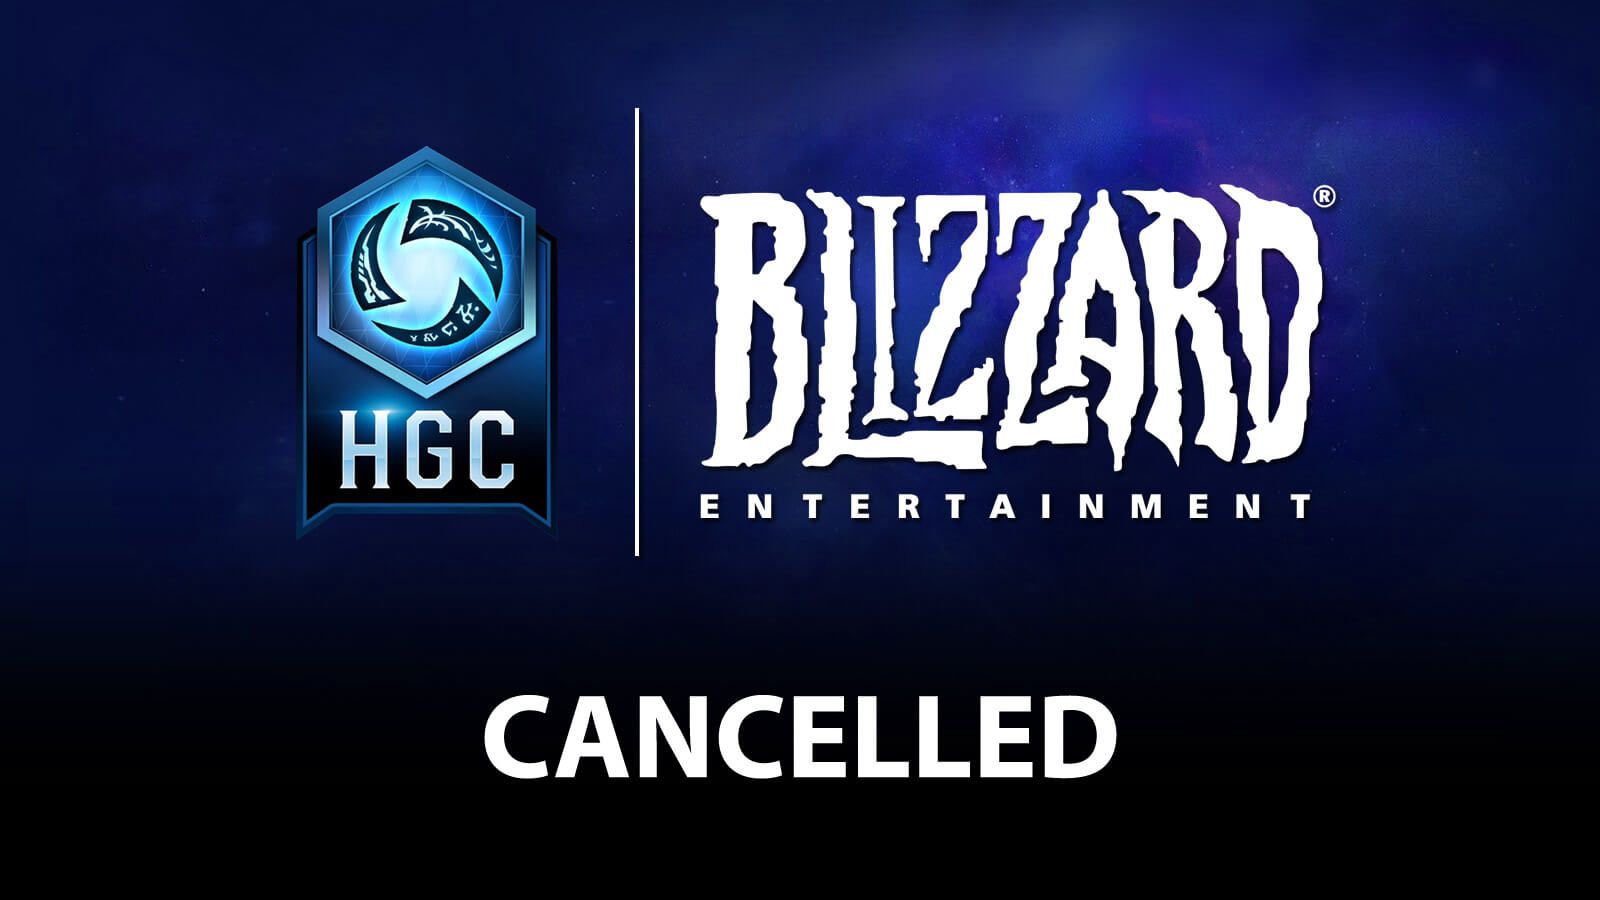 why doesnt blizzard just say theyre making diablo 4